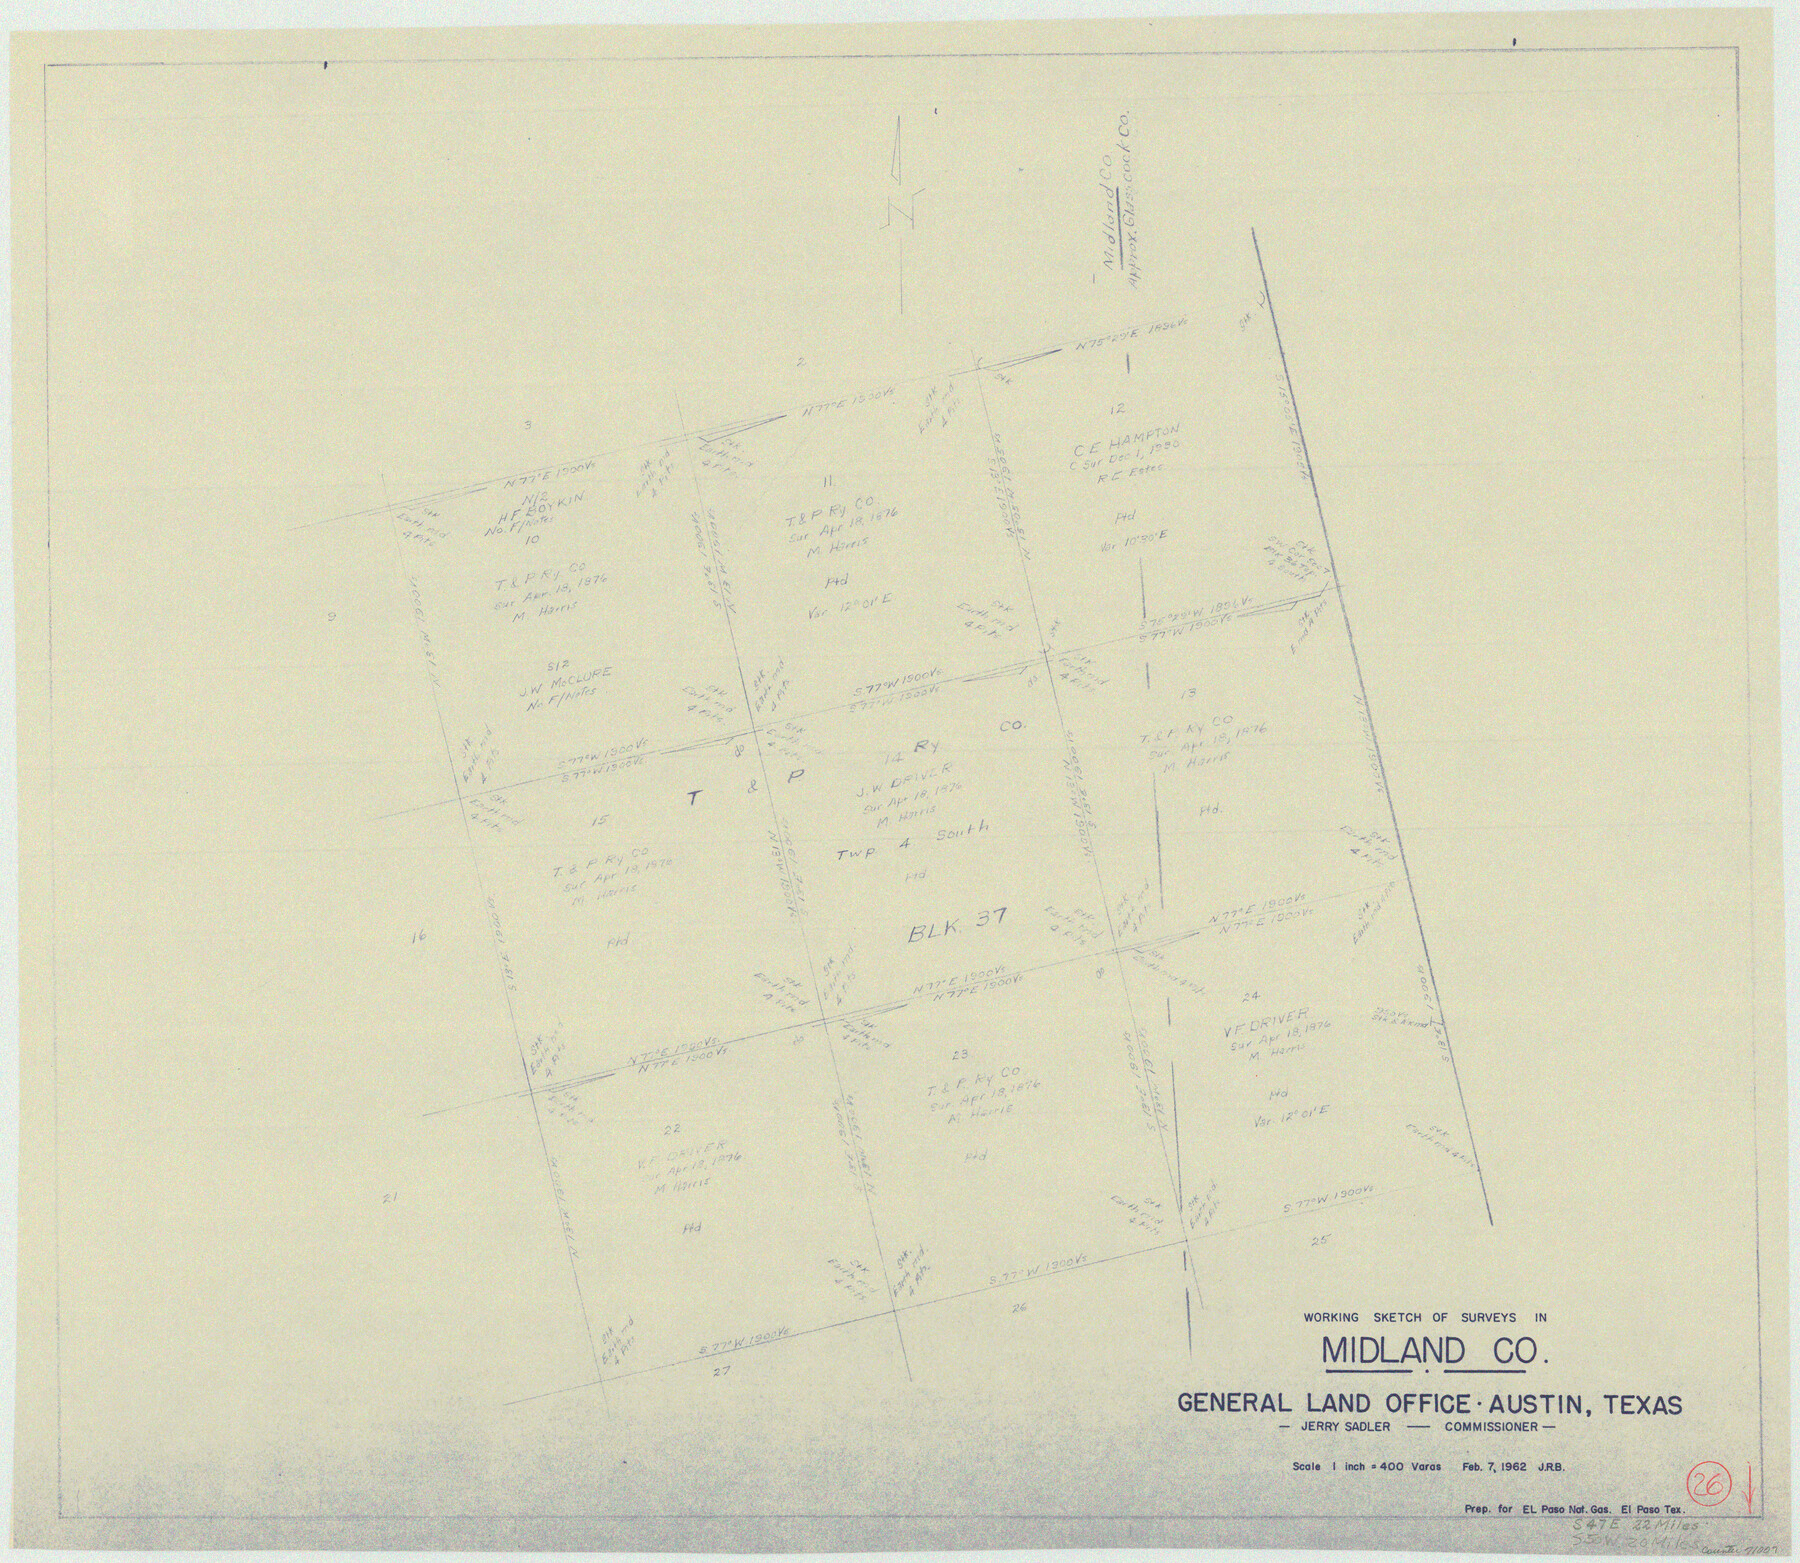 71007, Midland County Working Sketch 26, General Map Collection